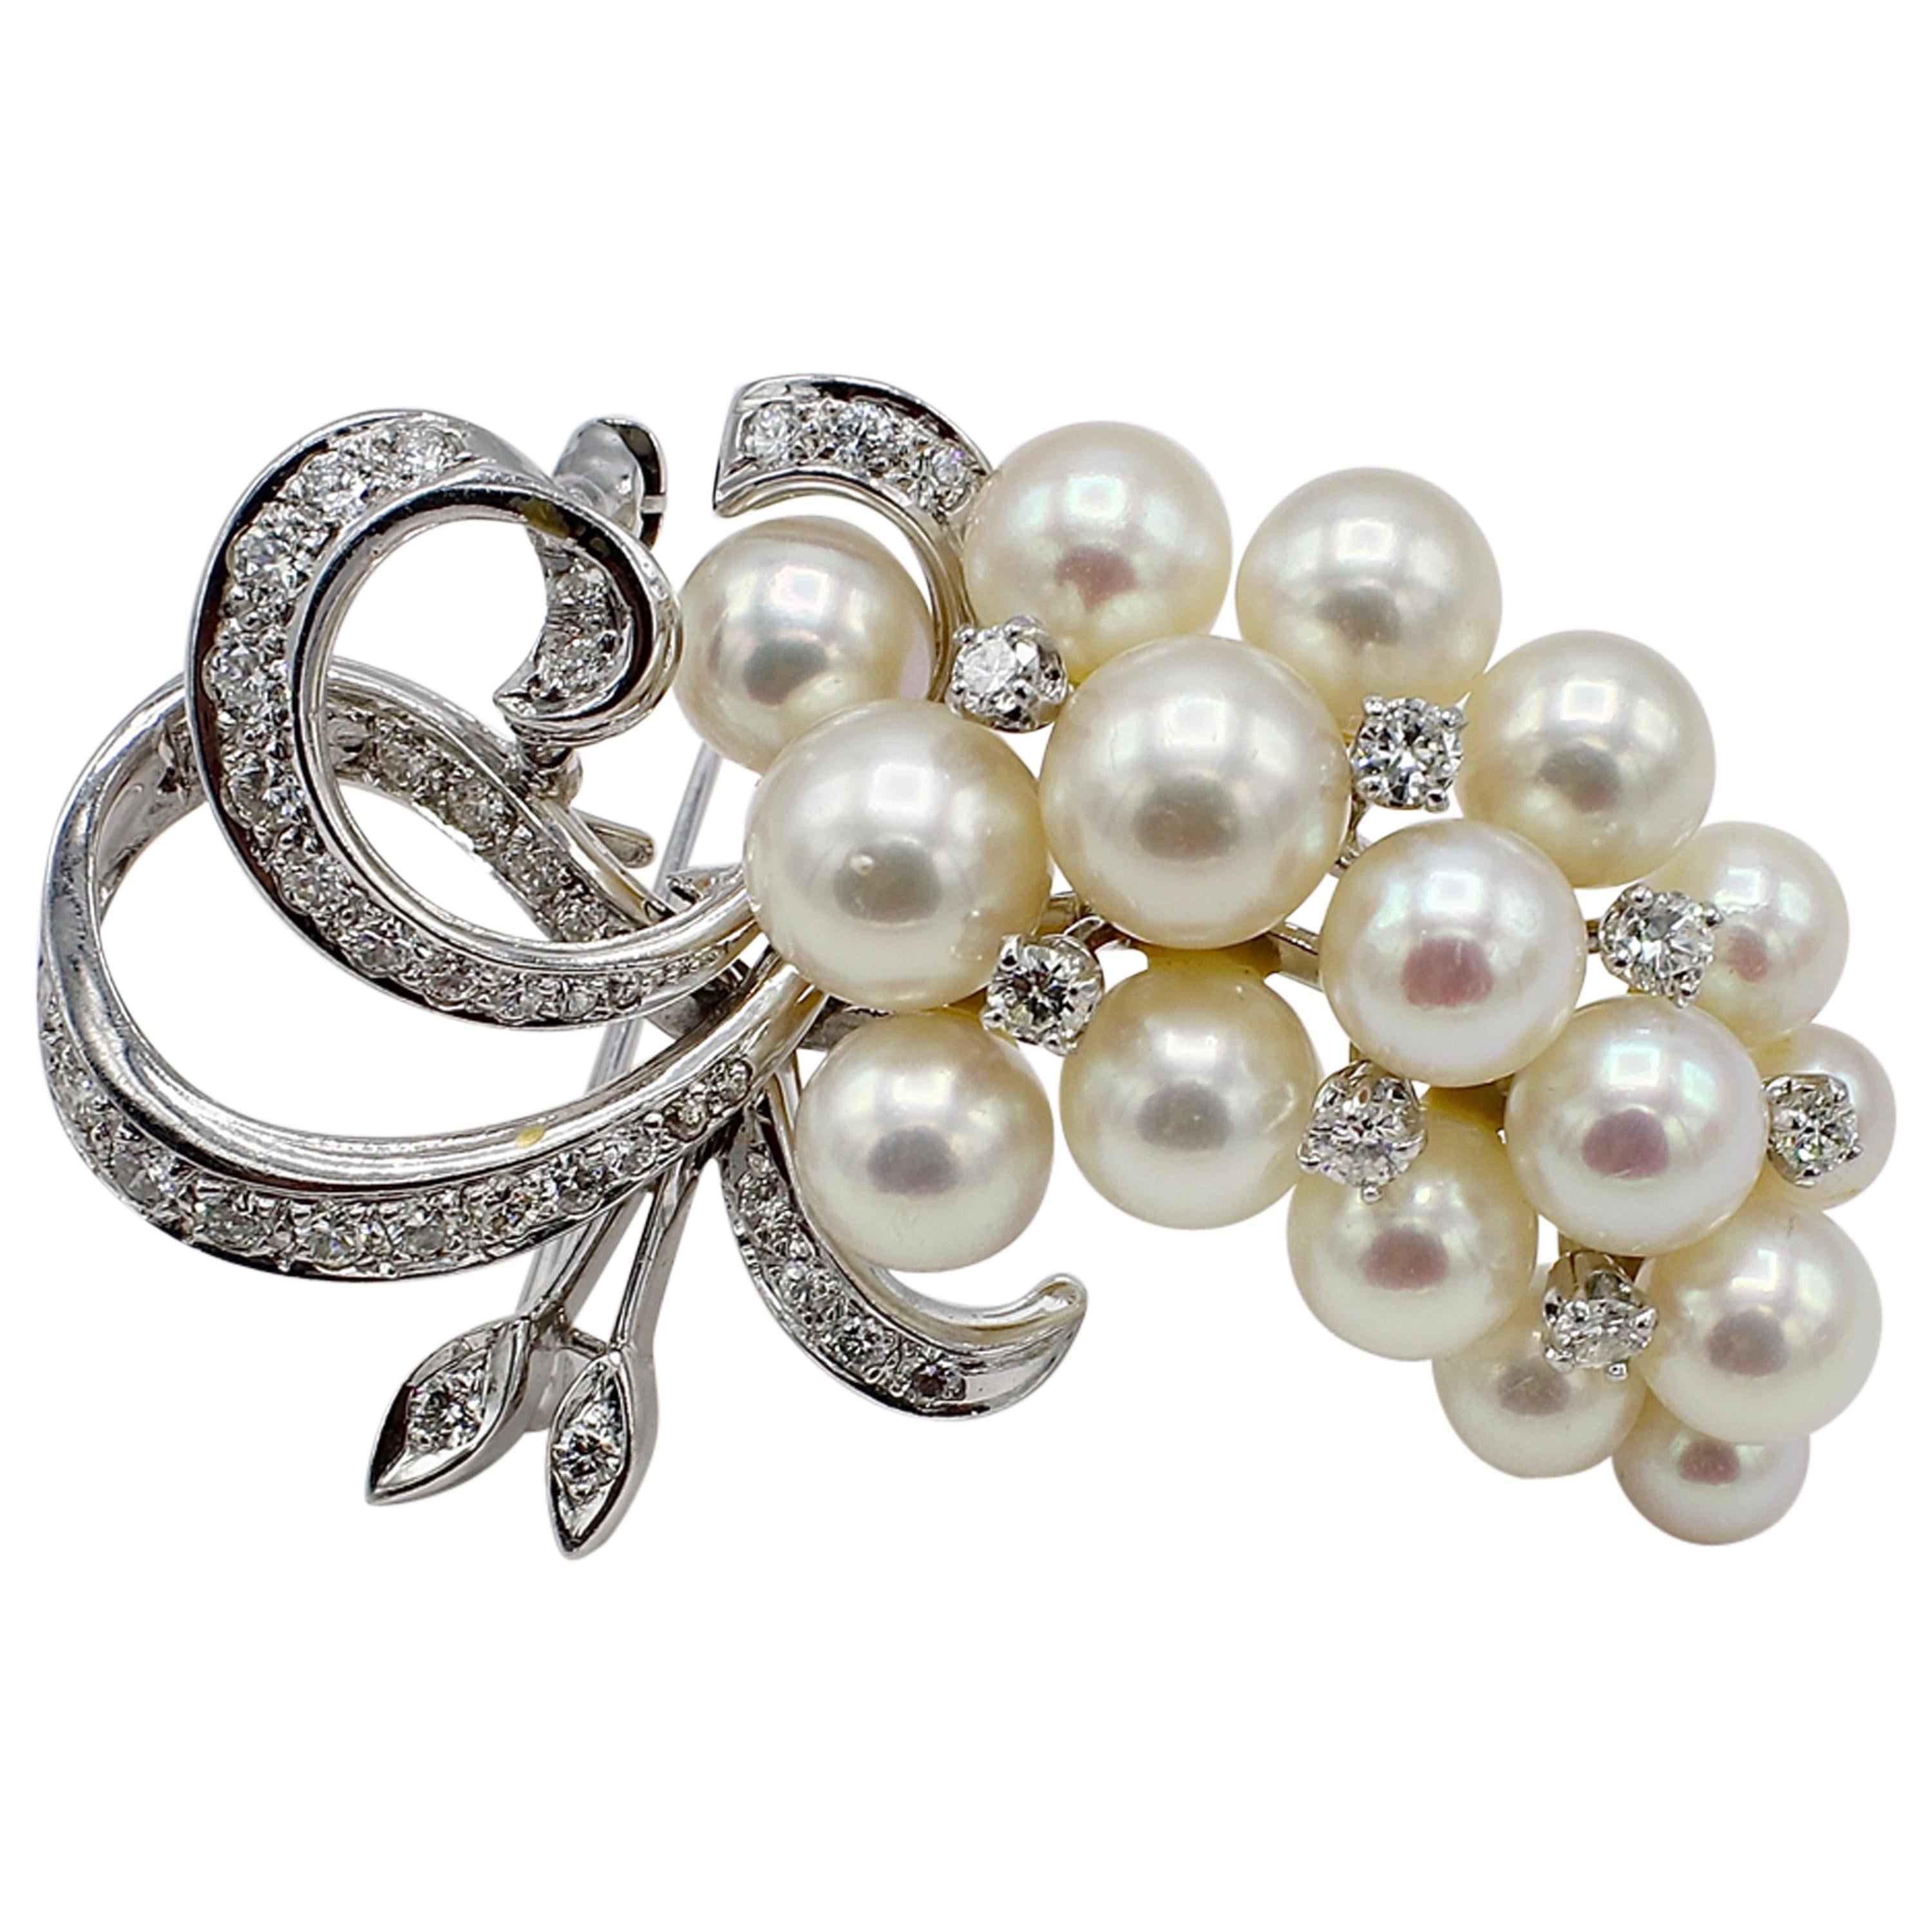 Midcentury 14 Karat White Gold Pearl and Diamond Cluster Pin Brooch